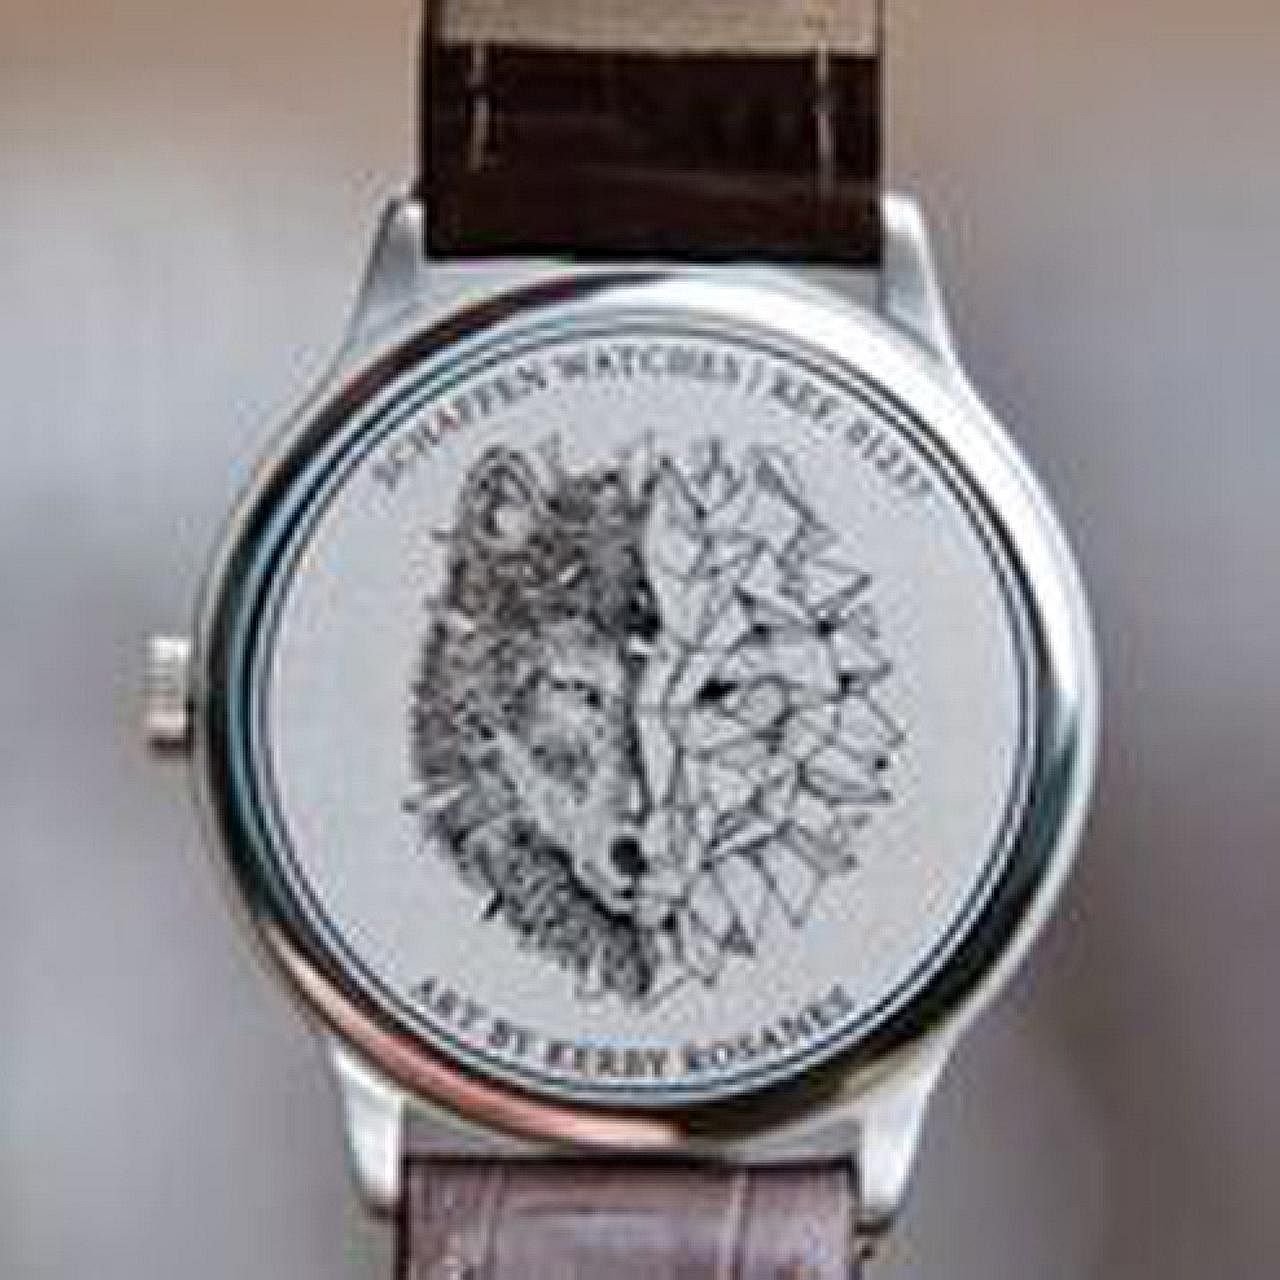 Mr Jonathan Han (right) and his elder brother Nicholas (far right) are behind Schaffen watches (above), whose designs include one with an illustration by artist Kerby Rosanes on the backcase (left).